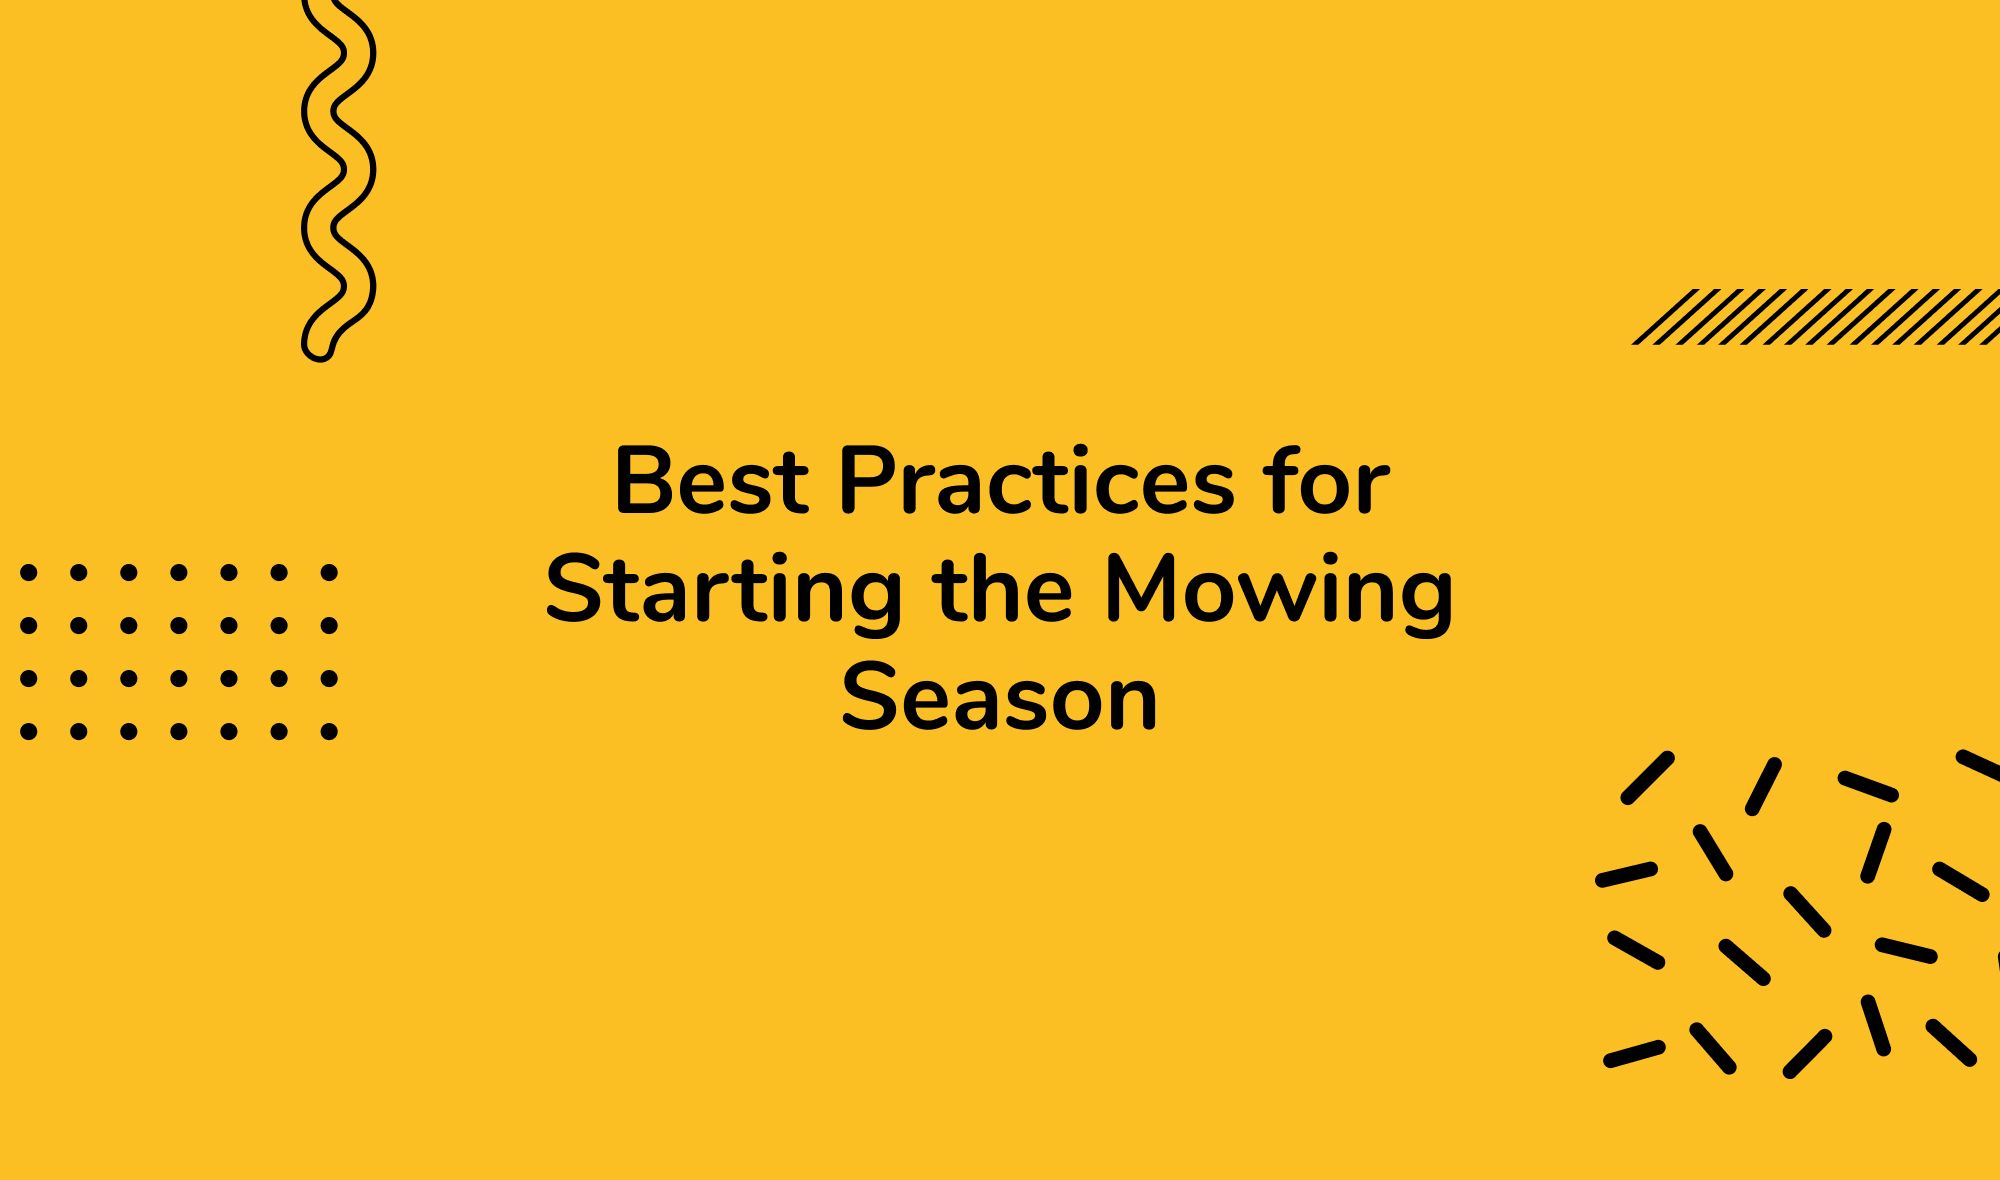 Best Practices for Starting the Mowing Season